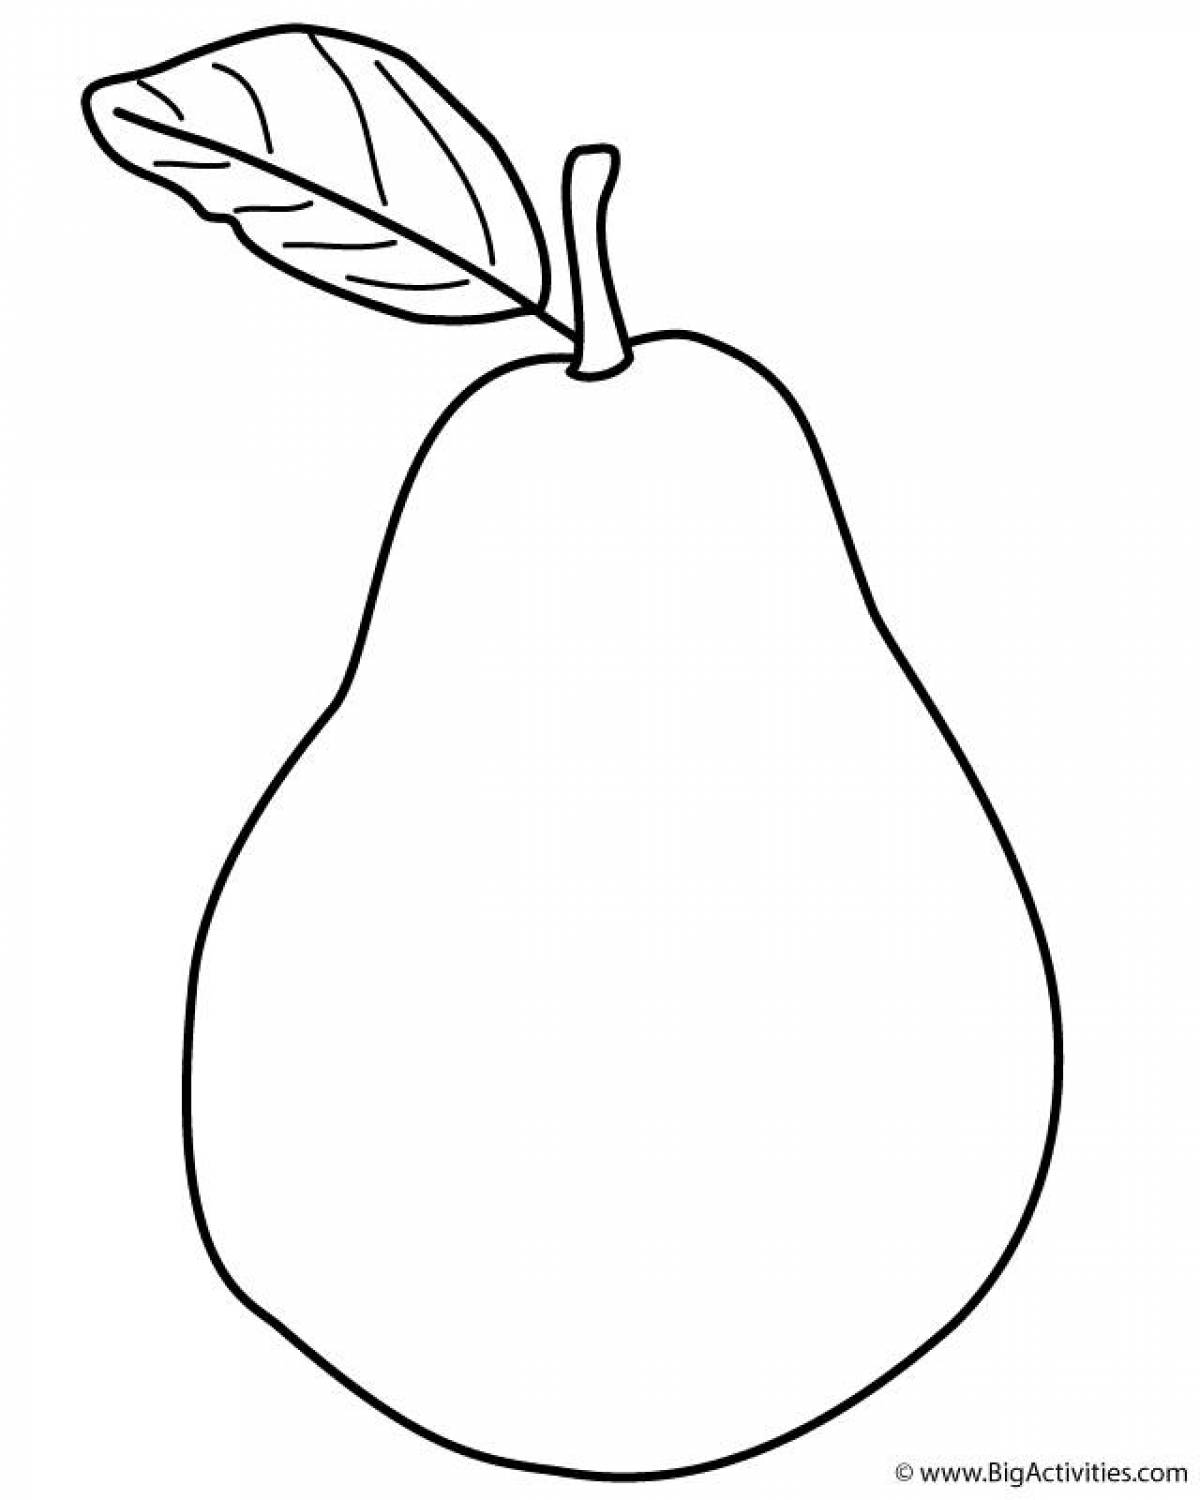 Exciting pear coloring page for kids